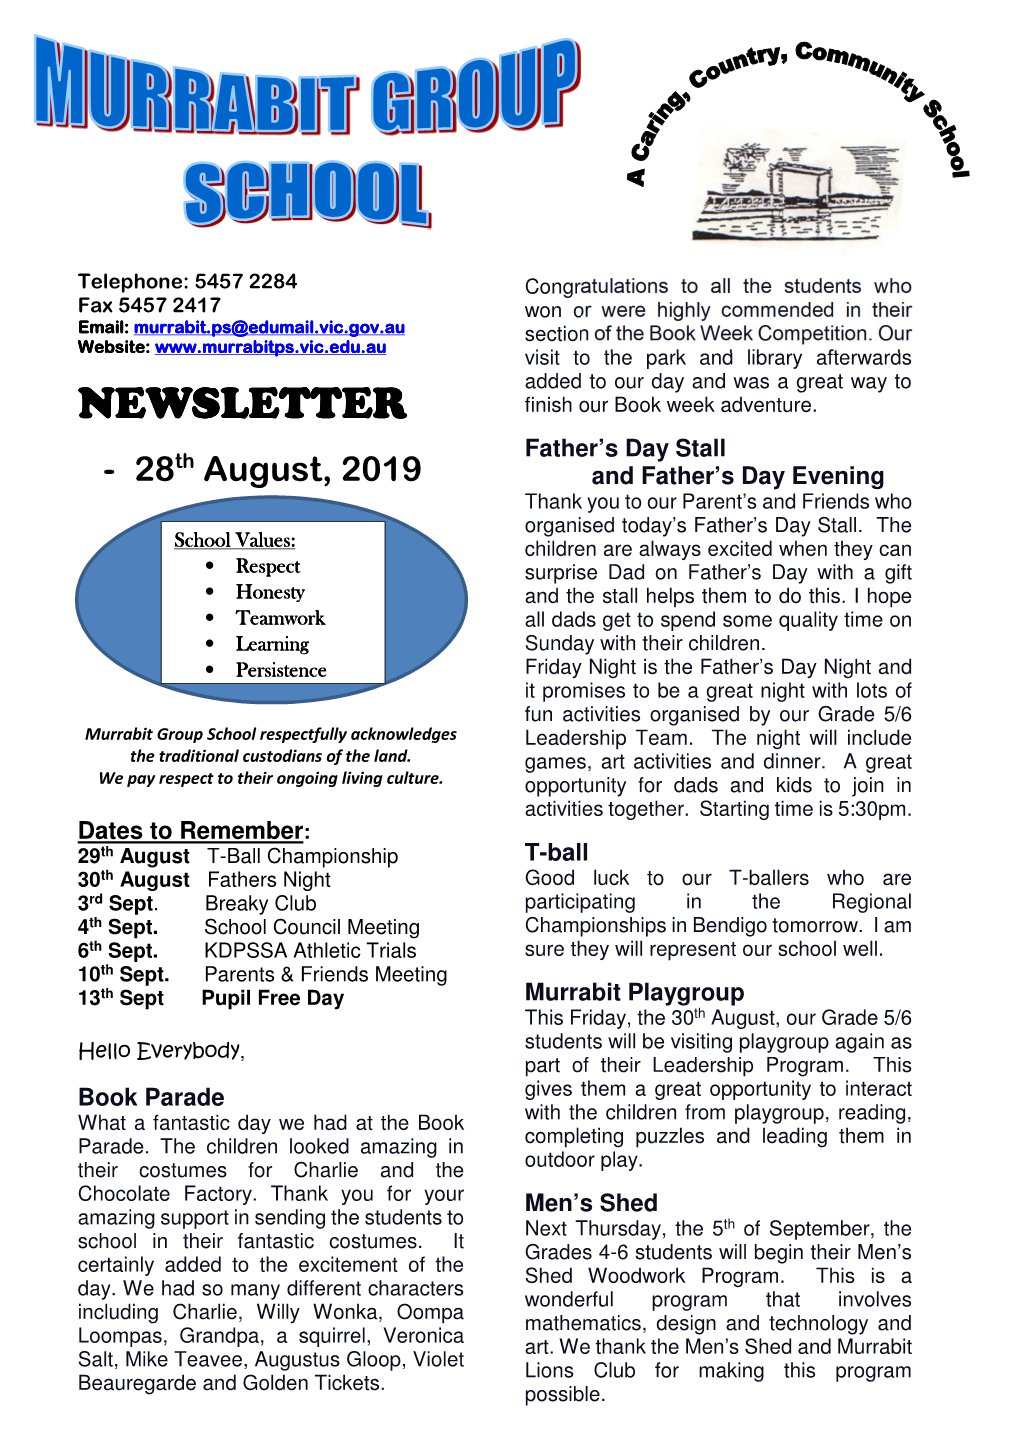 Newsletter for 28Th August 2019